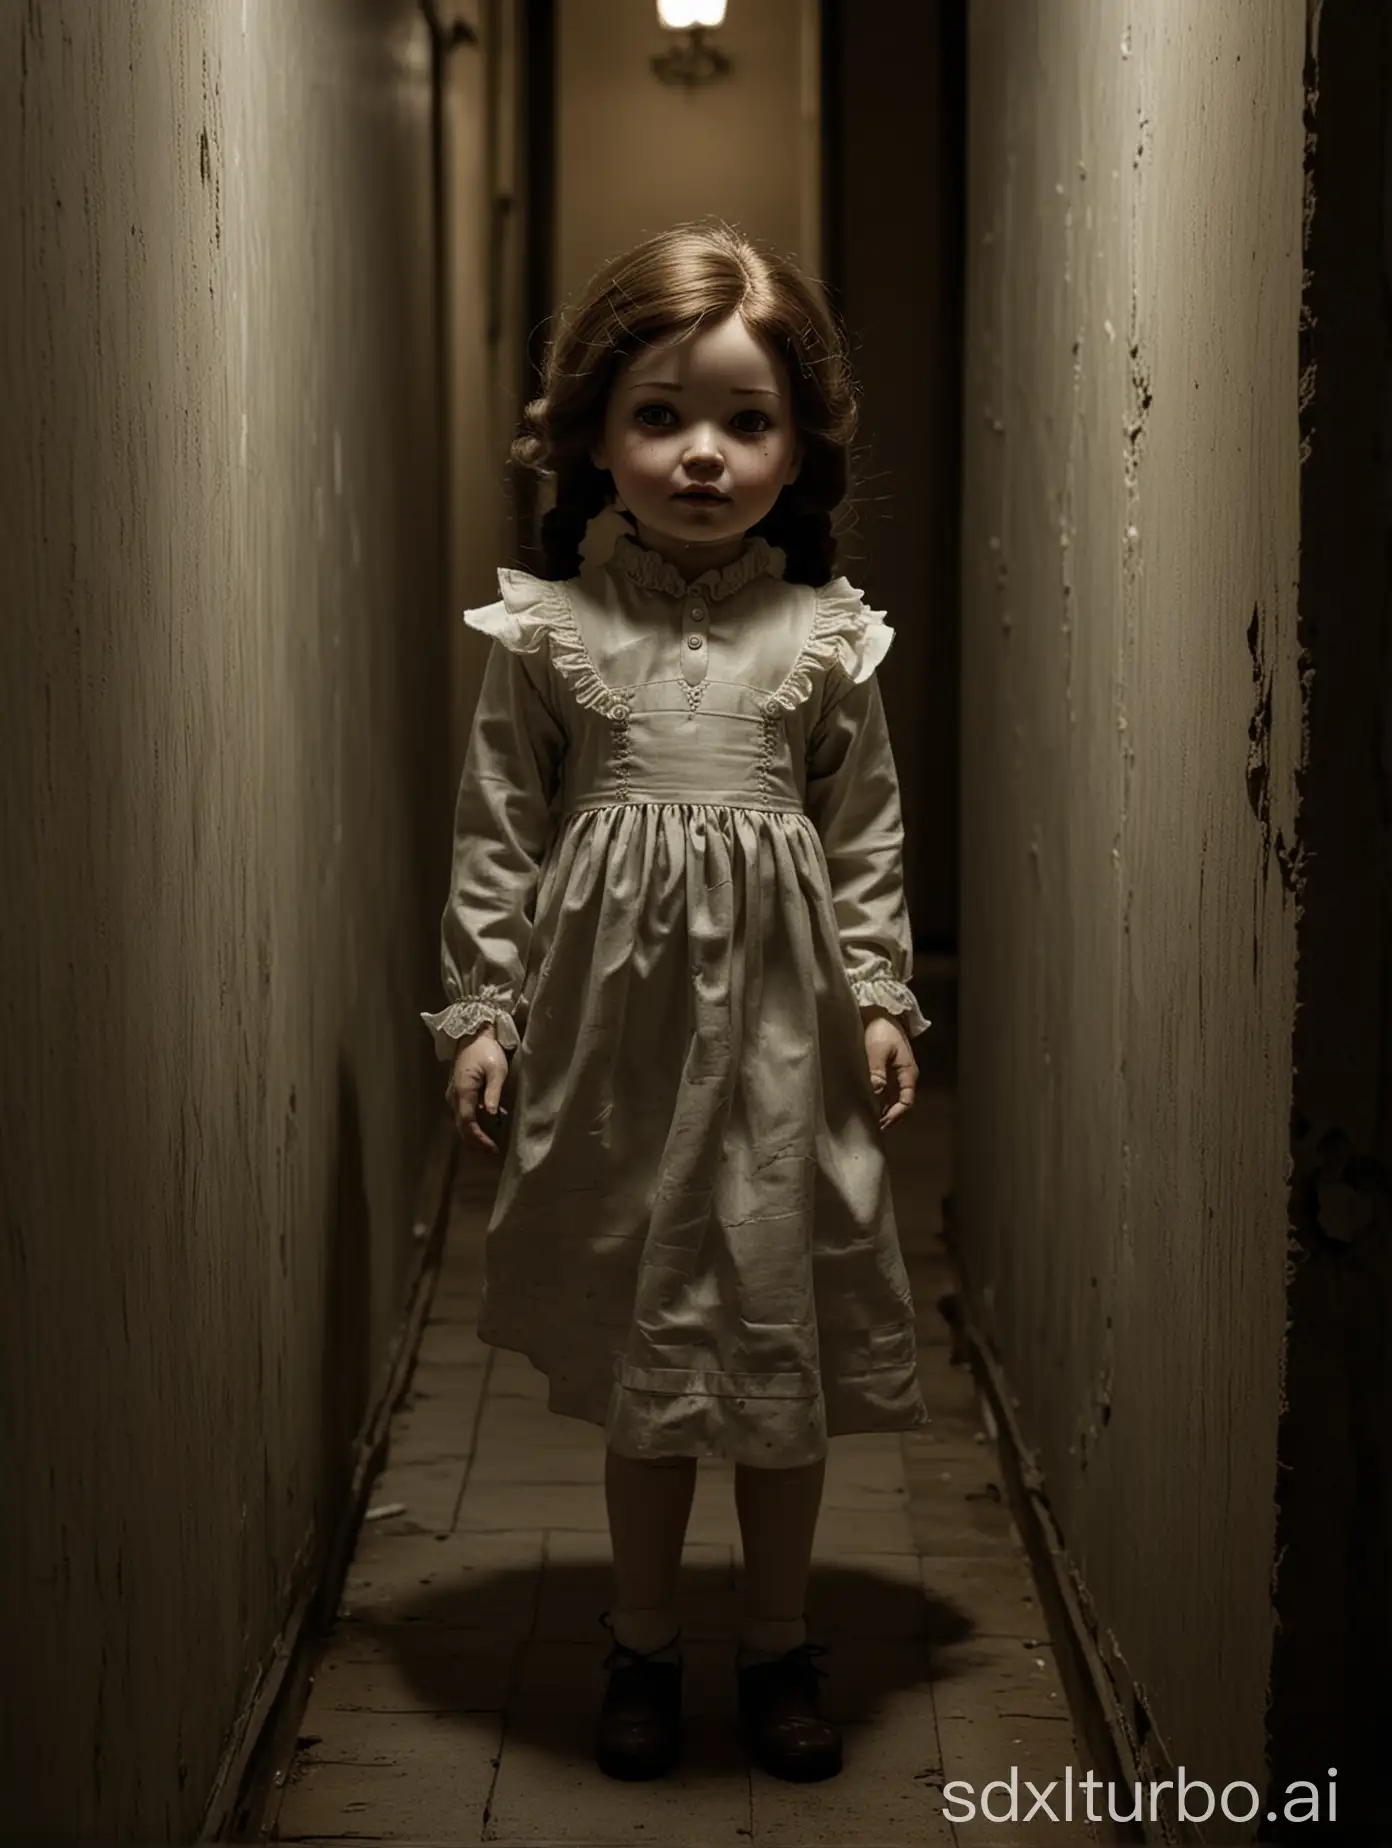 creepy porcelain china doll girl, cracked face, standing at the end of a hallway, dark barely visible lighting